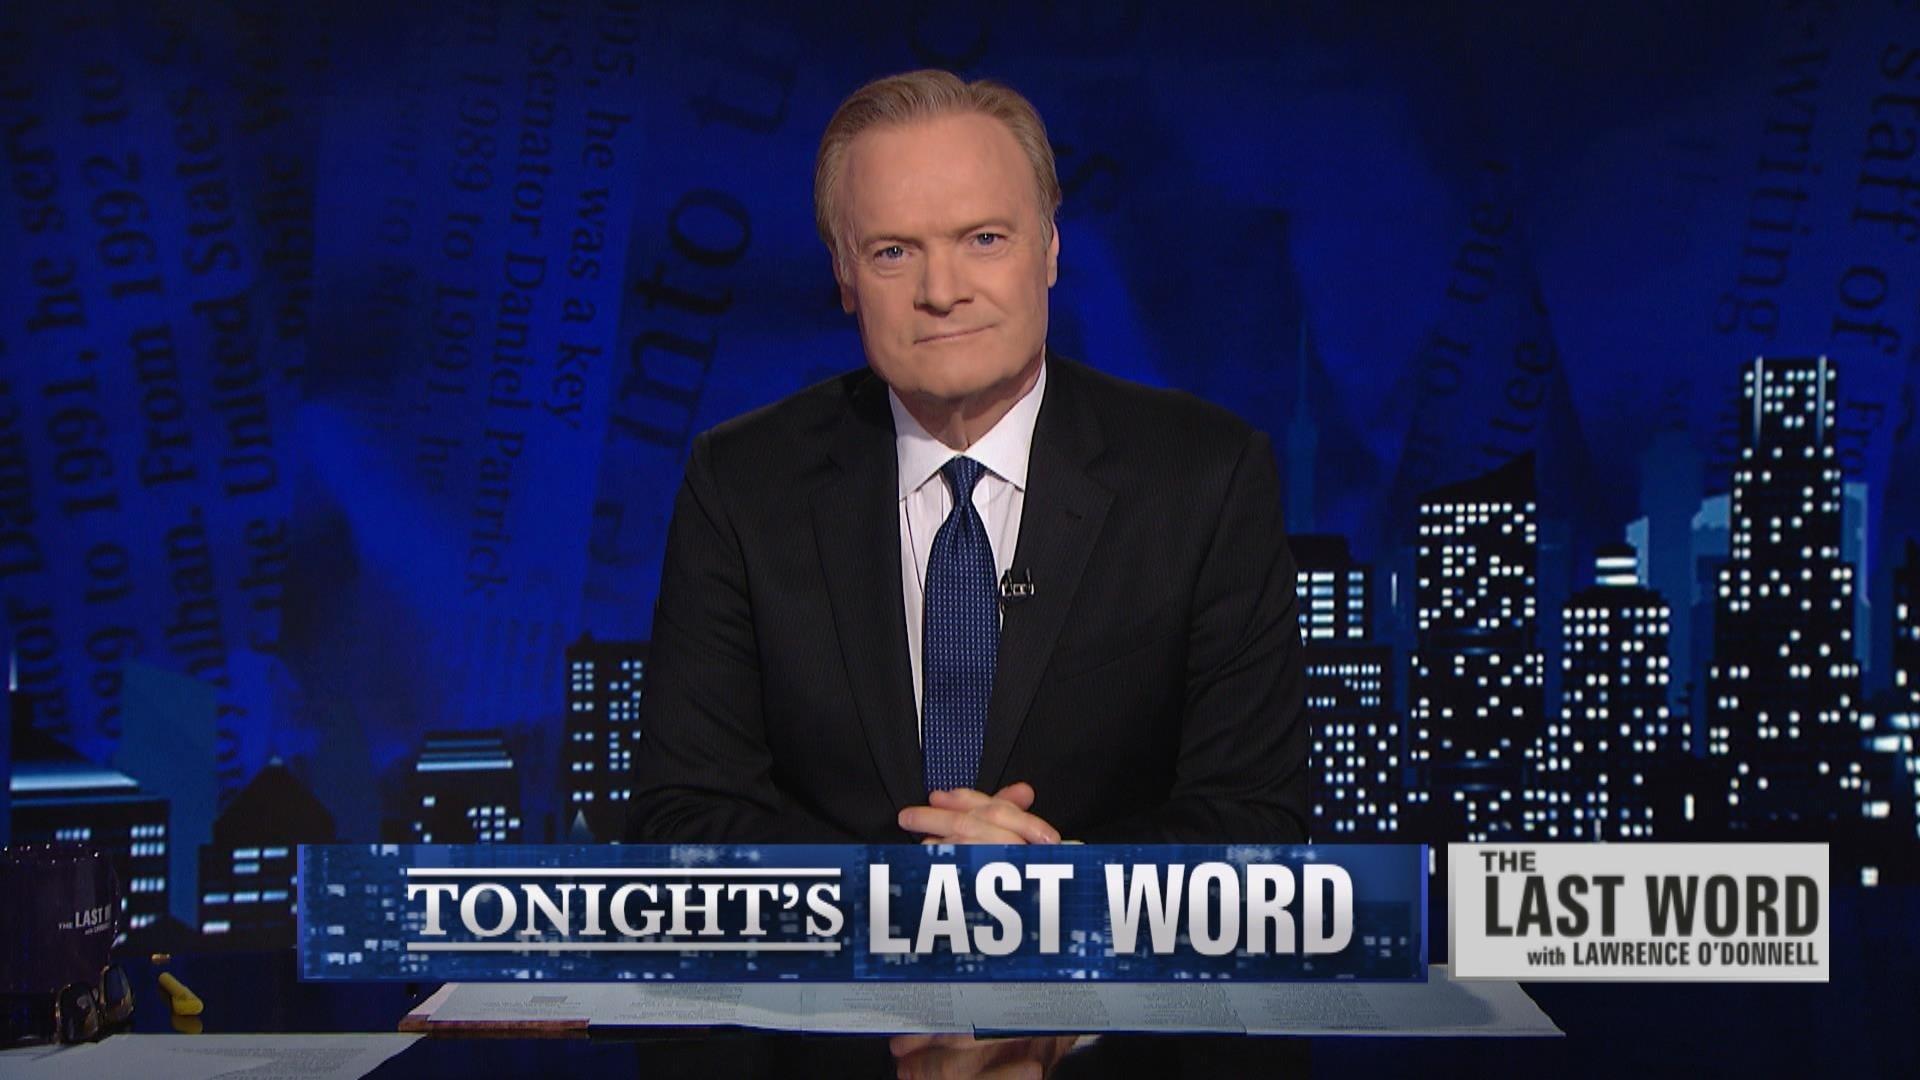 The Last Word with Lawrence O'Donnell backdrop